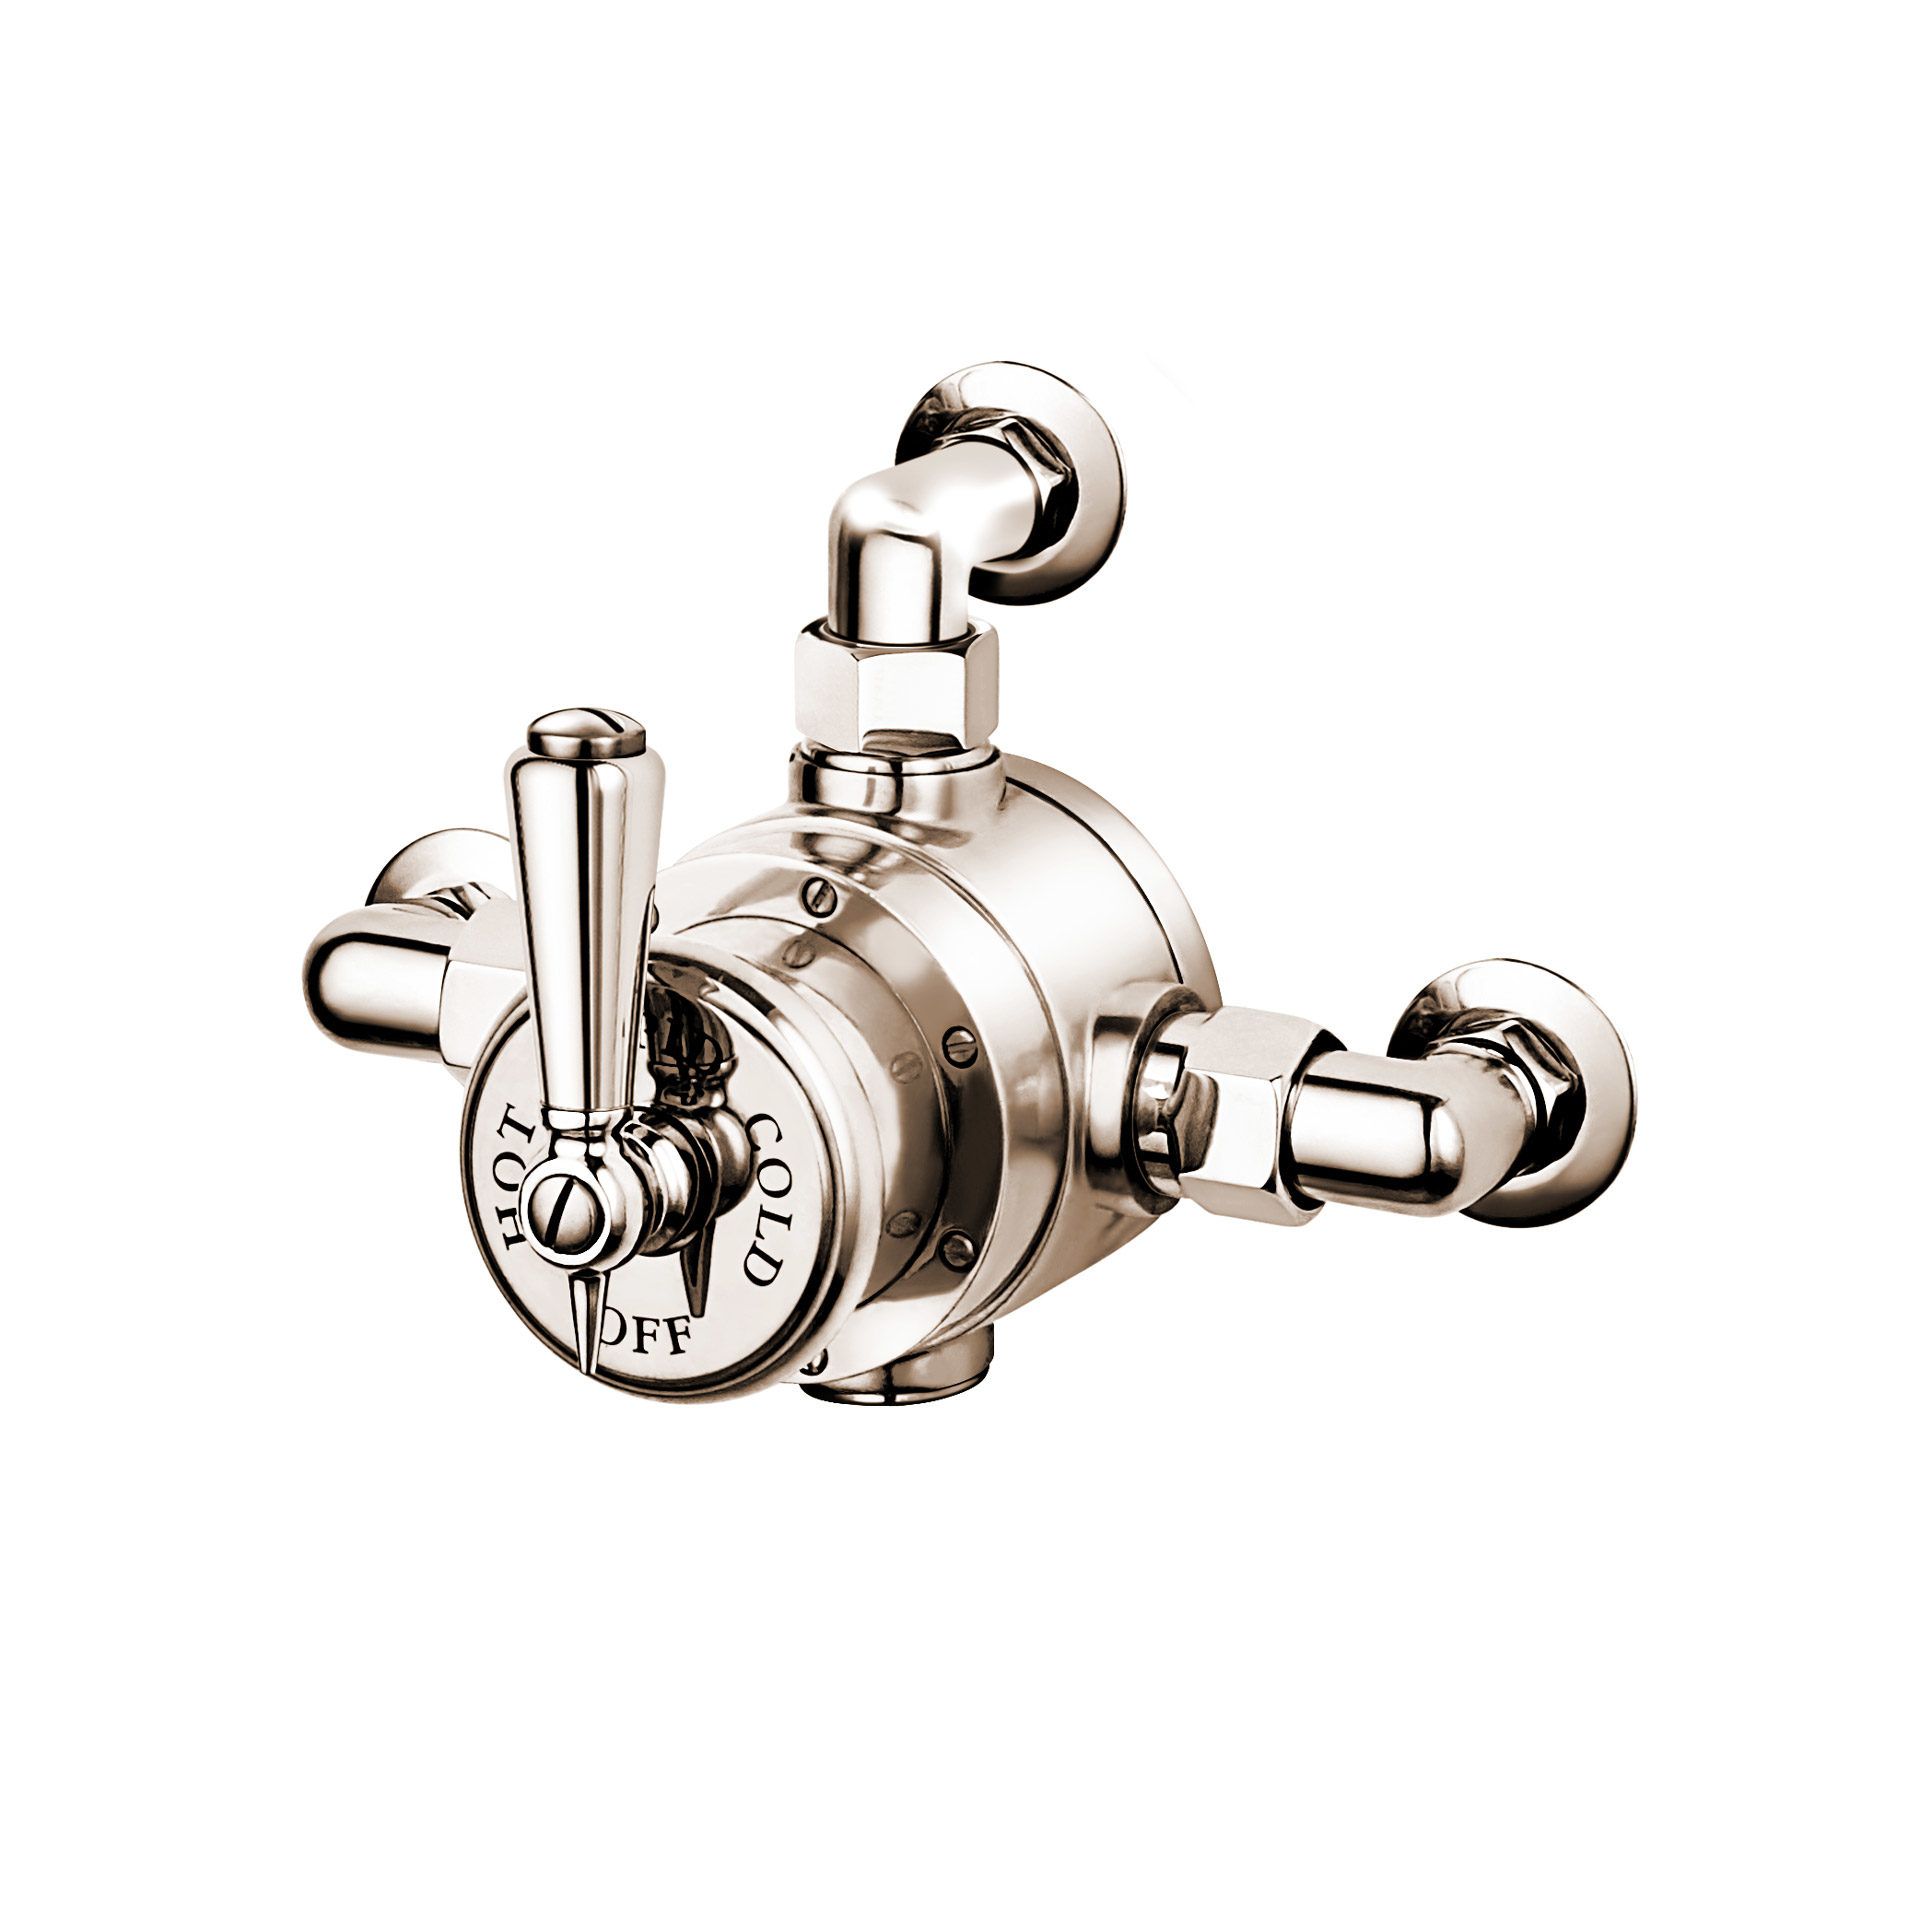 Exposed Regent Thermostatic Shower Valve with concealed riser and compression elbow